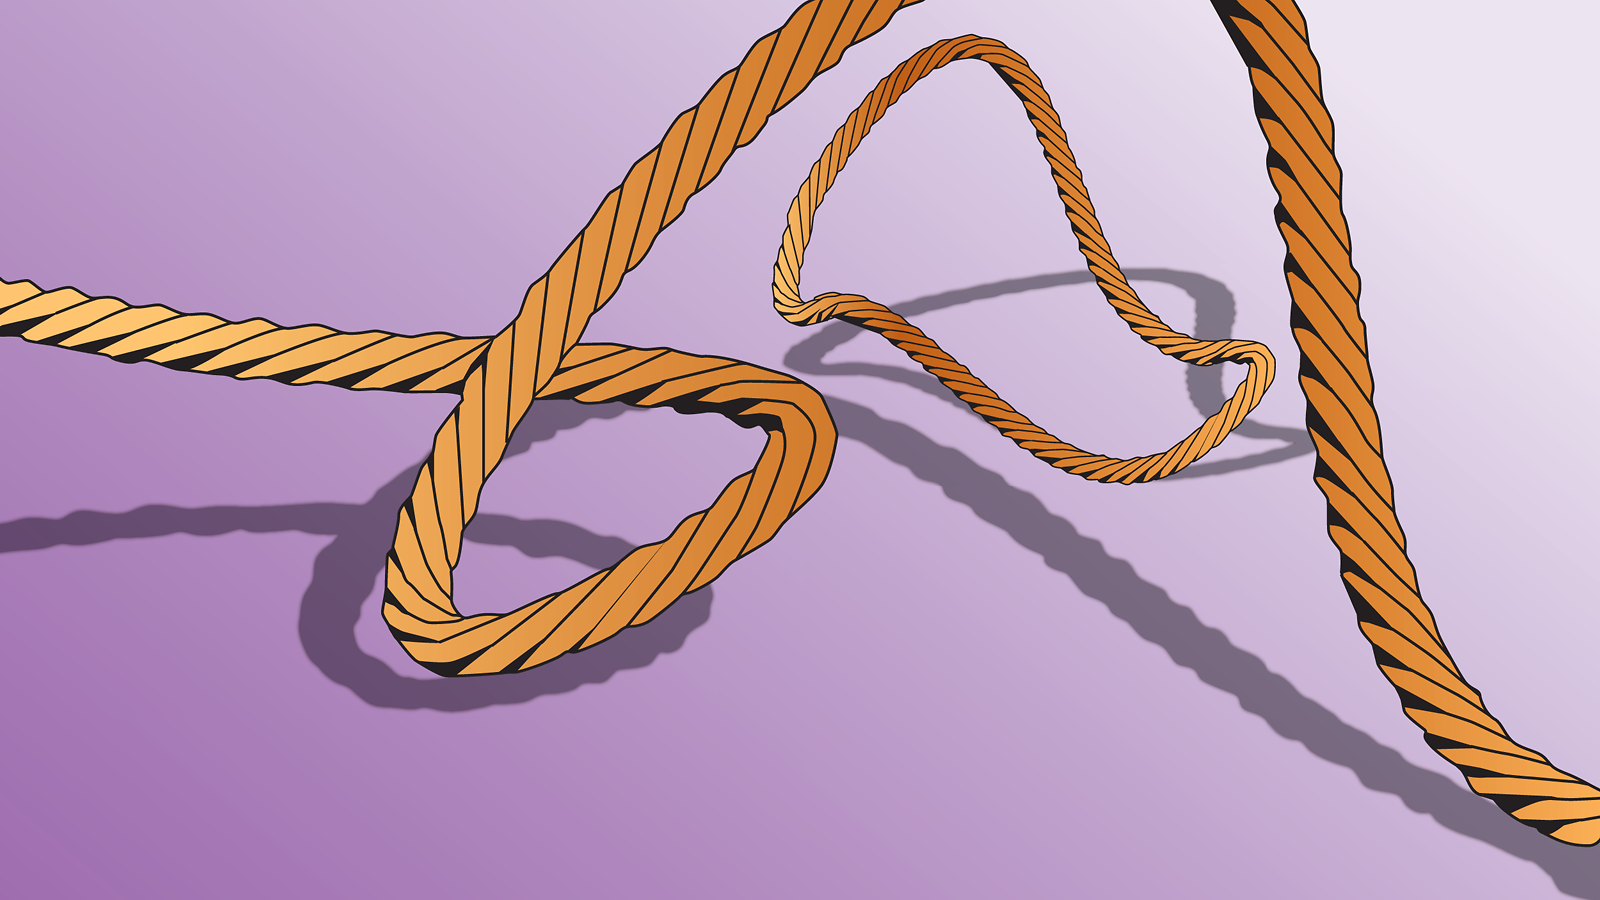 An illustration of twisting ropes